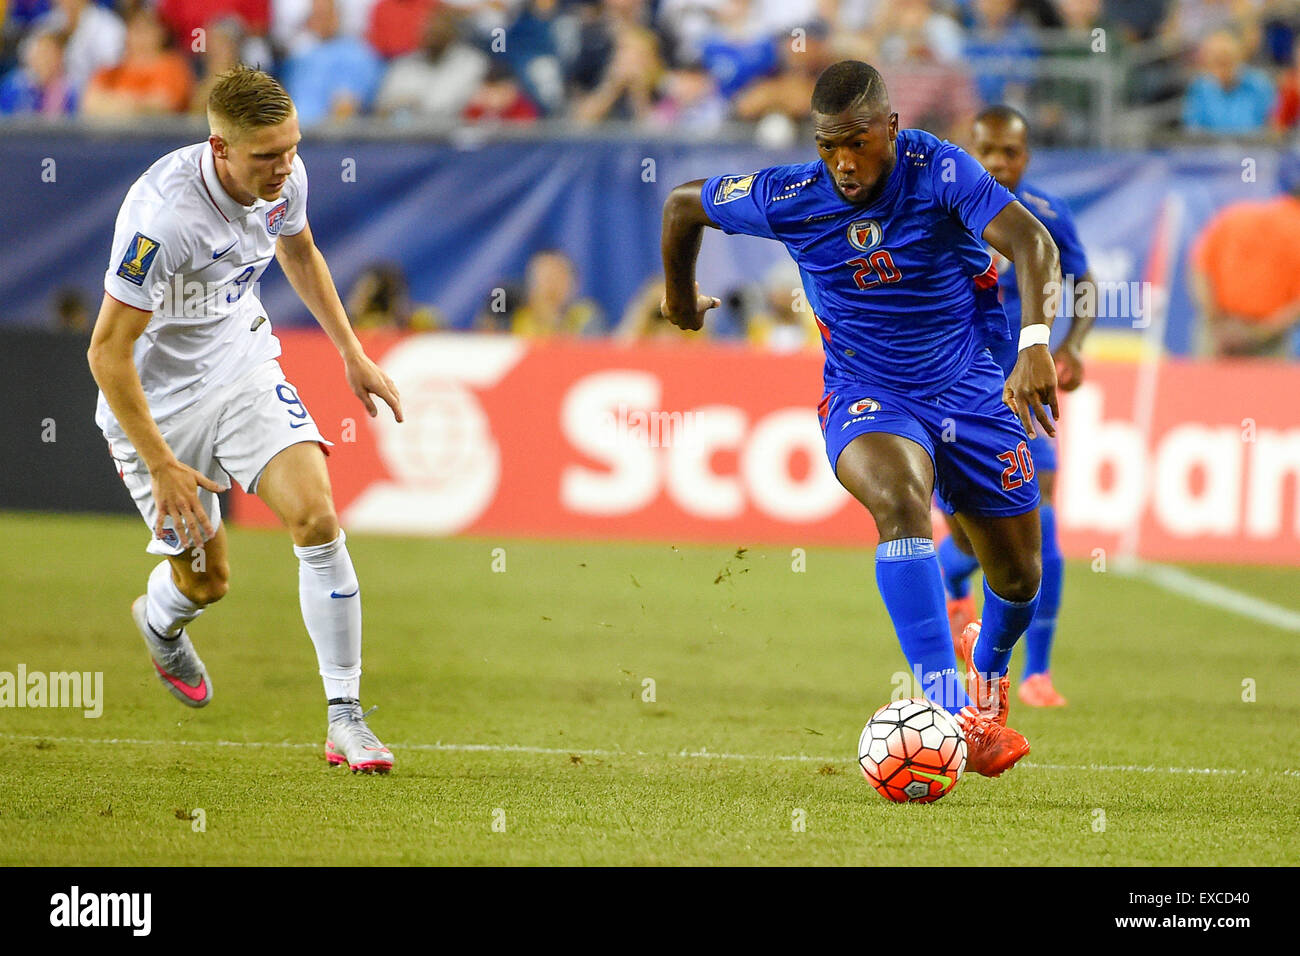 Foxborough, Massachusetts, USA. 10th July, 2015. Haiti forward Duckens Nazon (20) works to keep the ball with under pressure from United States forward Aron Johannsson (9) during the CONCACAF Gold Cup group stage match between USA and Haiti held at Gillette Stadium, in Foxborough Massachusetts. USA defeated Haiti 1-0. Eric Canha/CSM/Alamy Live News Stock Photo